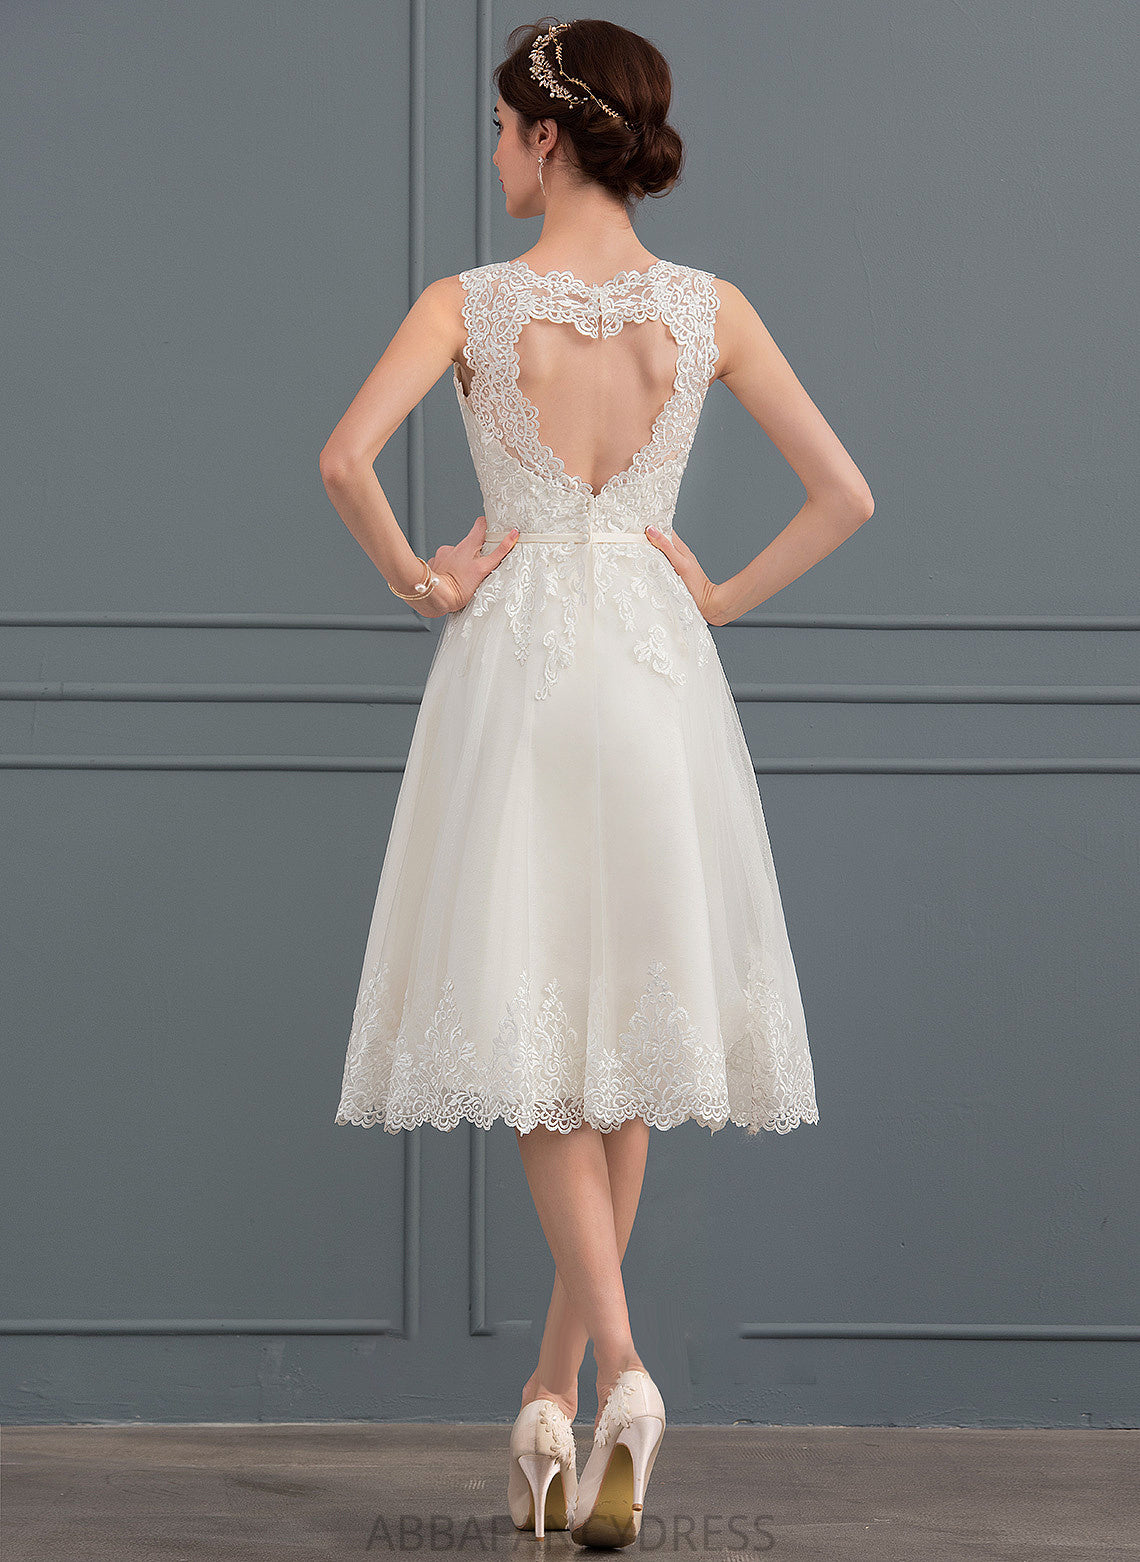 Knee-Length Wedding Illusion With Tulle A-Line Bow(s) Salome Dress Wedding Dresses